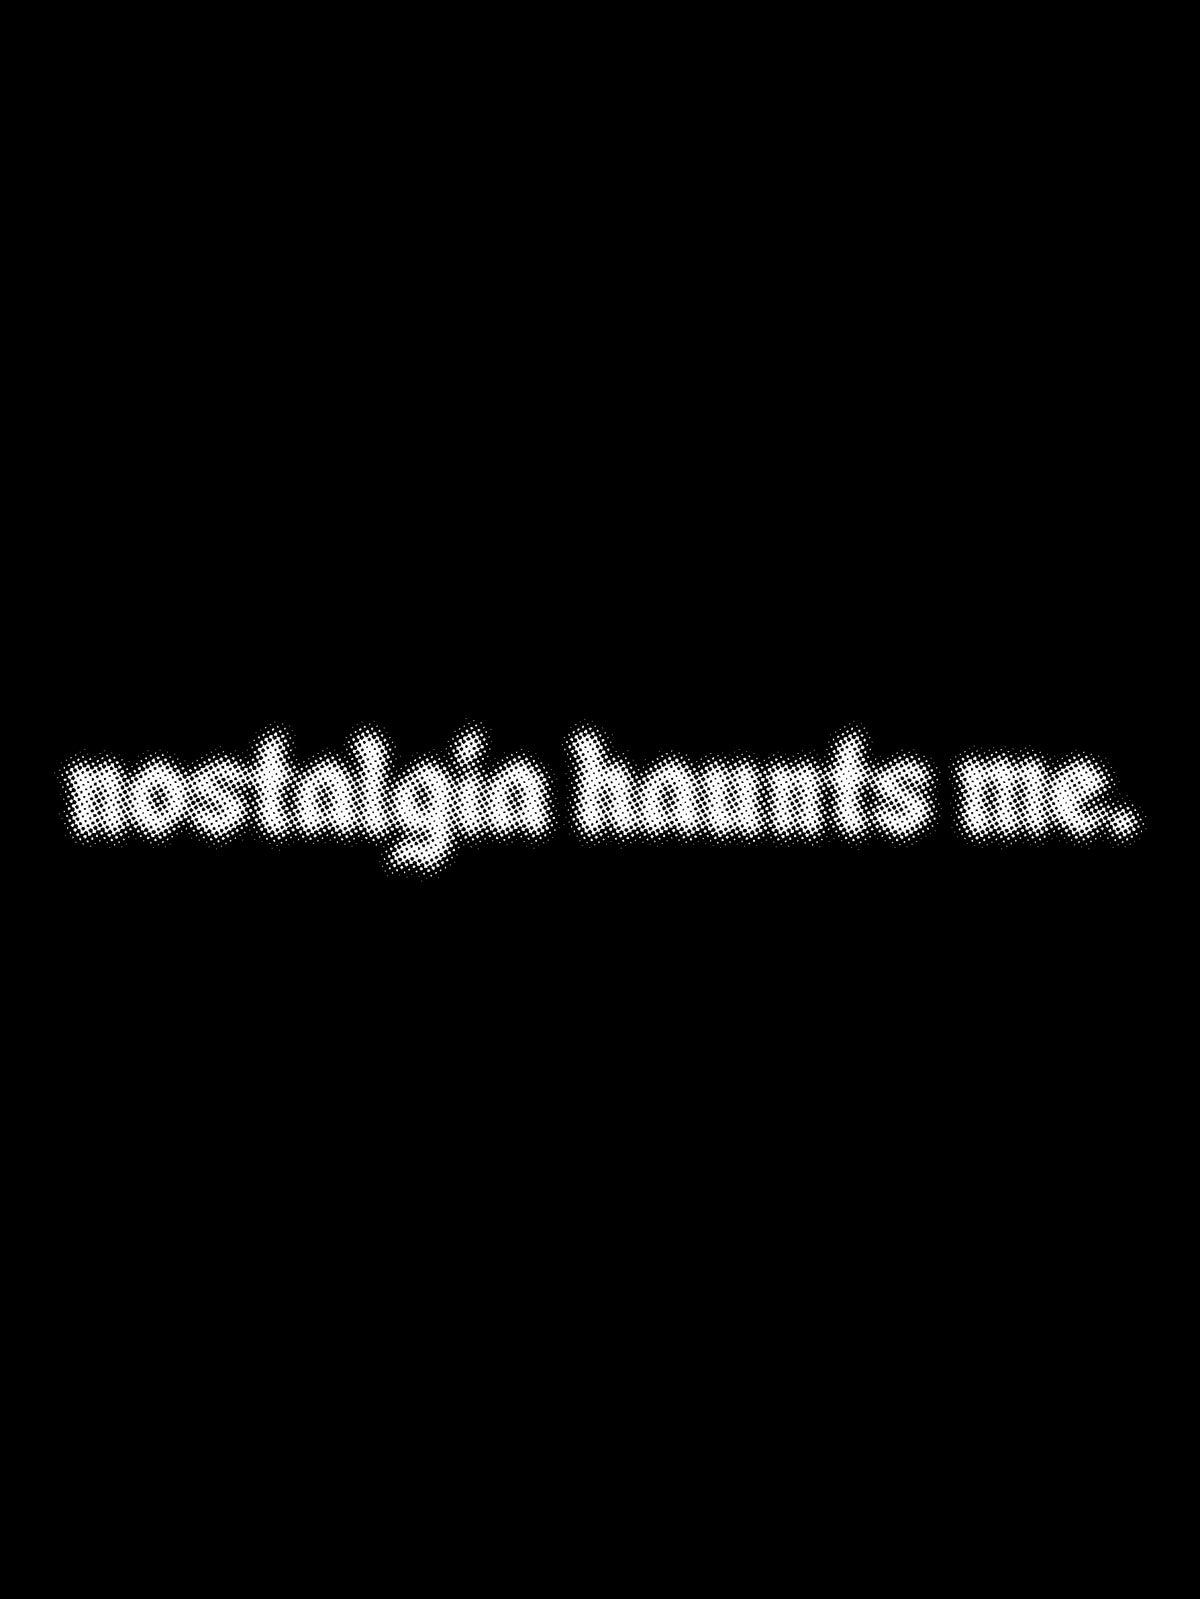 Nostalgia Haunts Me by Kacey Fifield